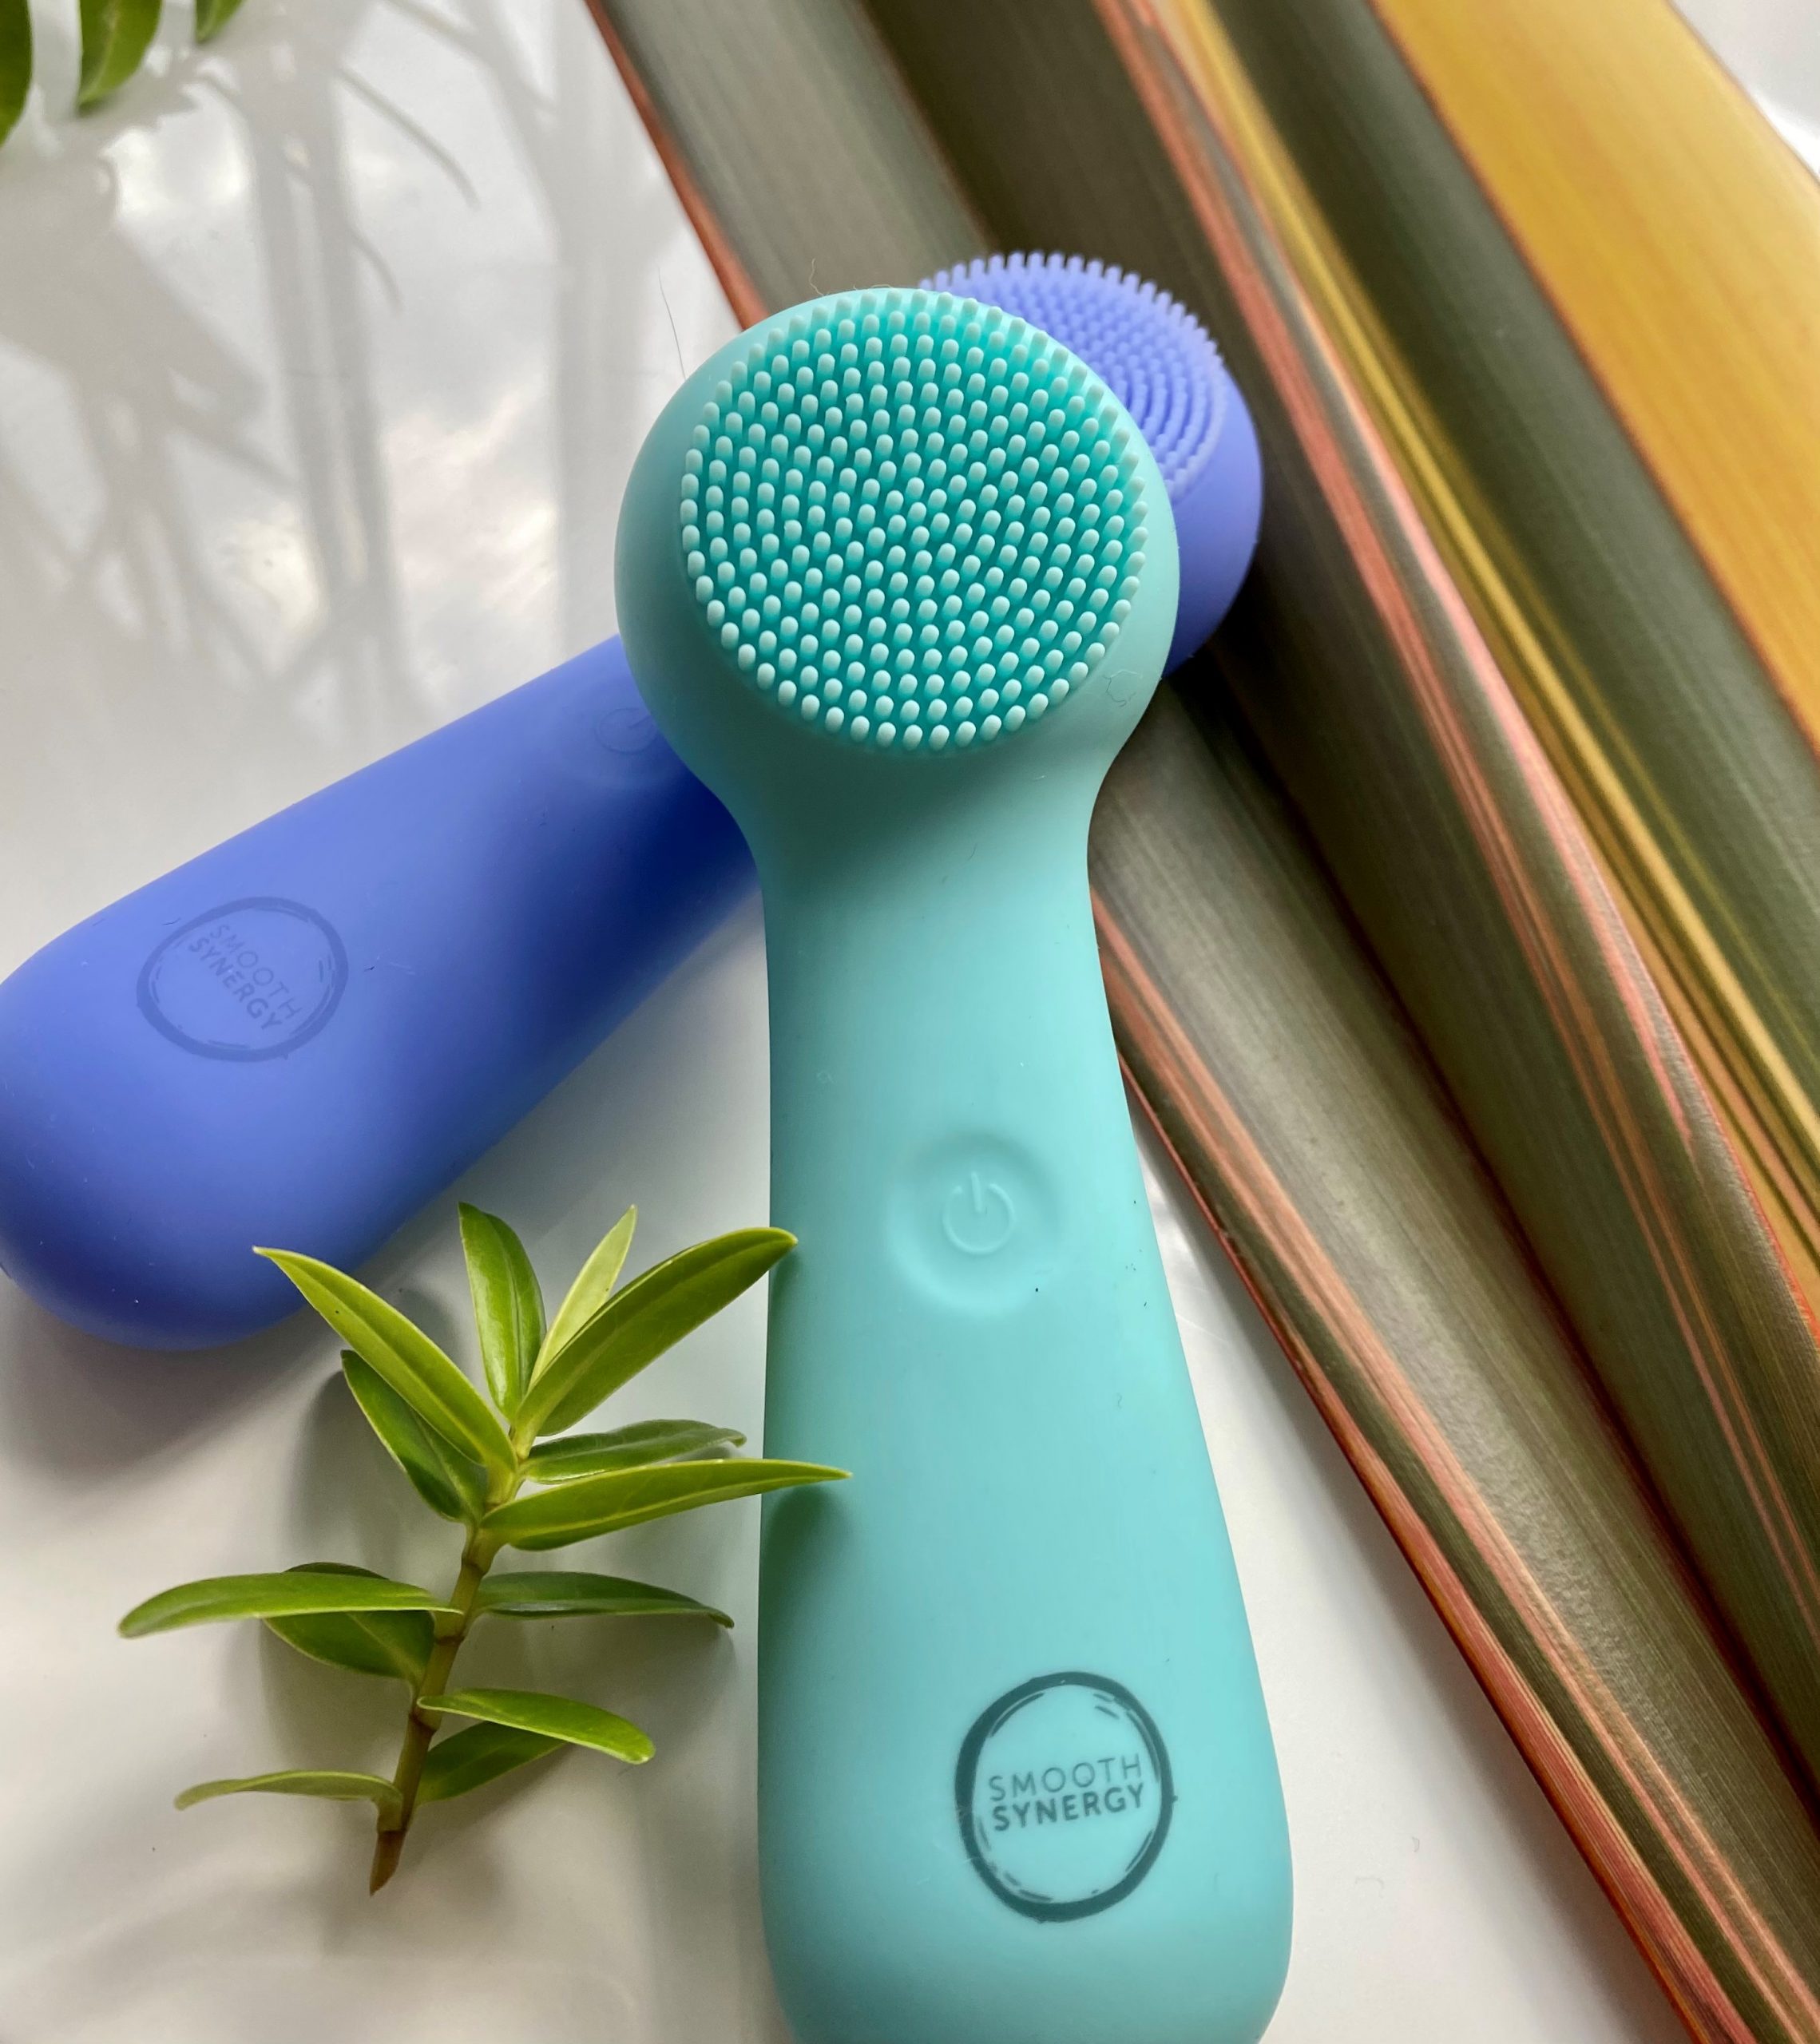 Smooth Synergy Facial Cleansing Brush